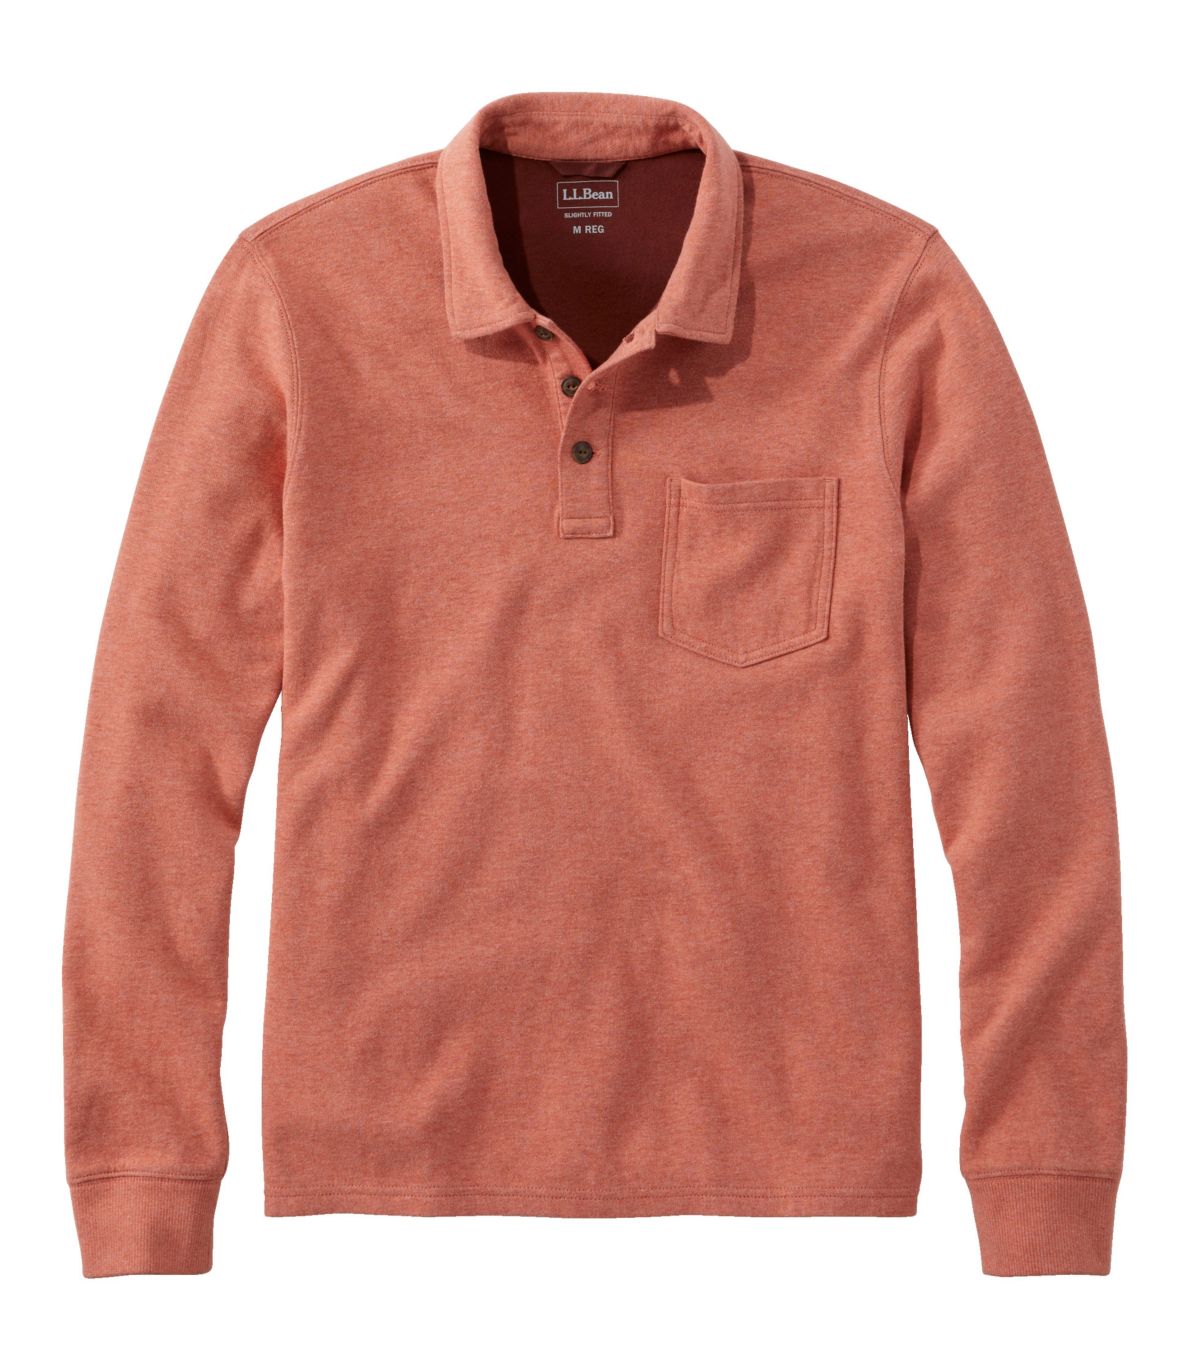 Men's Washed Cotton Double-Knit Polo, Long-Sleeve